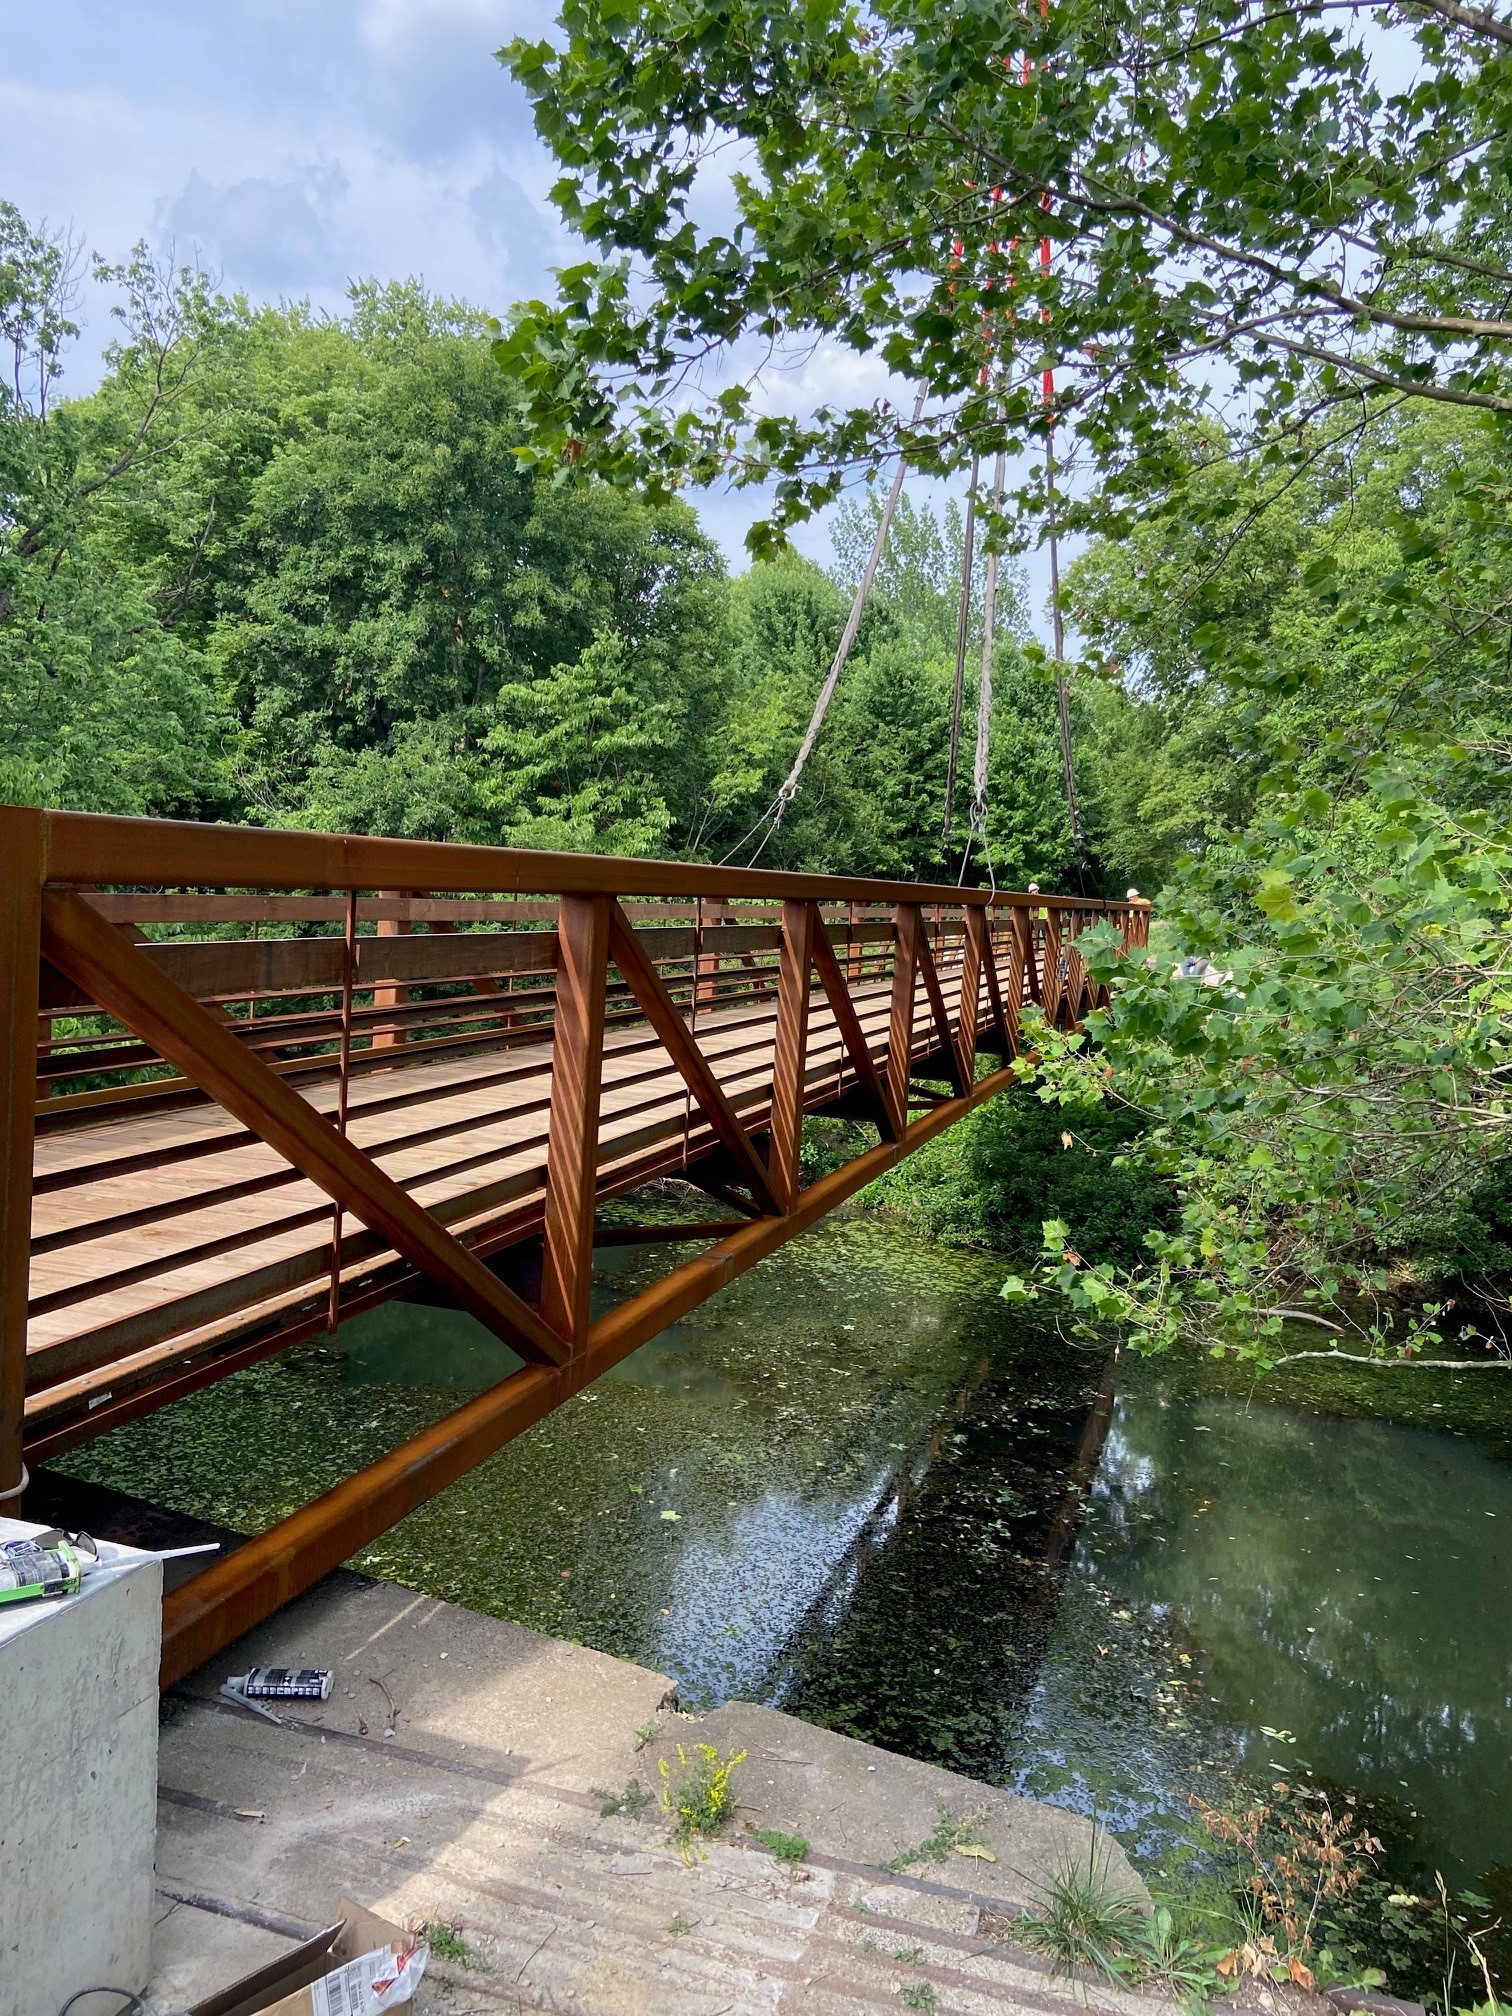 Featured image for “New Pedestrian Bridge Over Ohio-Erie Canal Connects Trails”